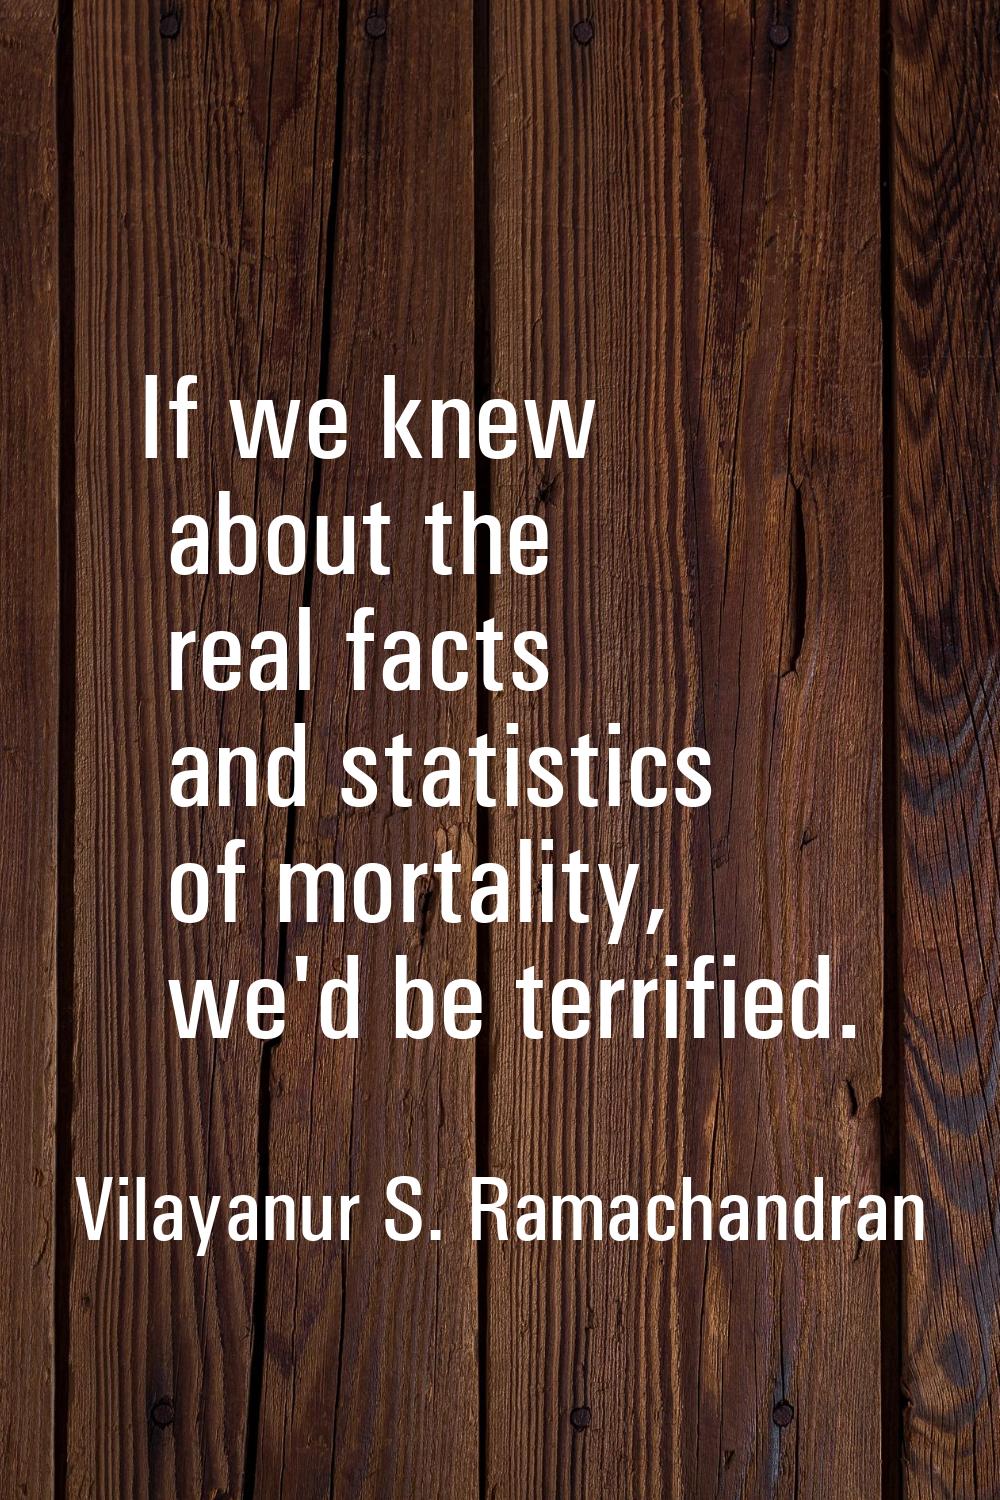 If we knew about the real facts and statistics of mortality, we'd be terrified.